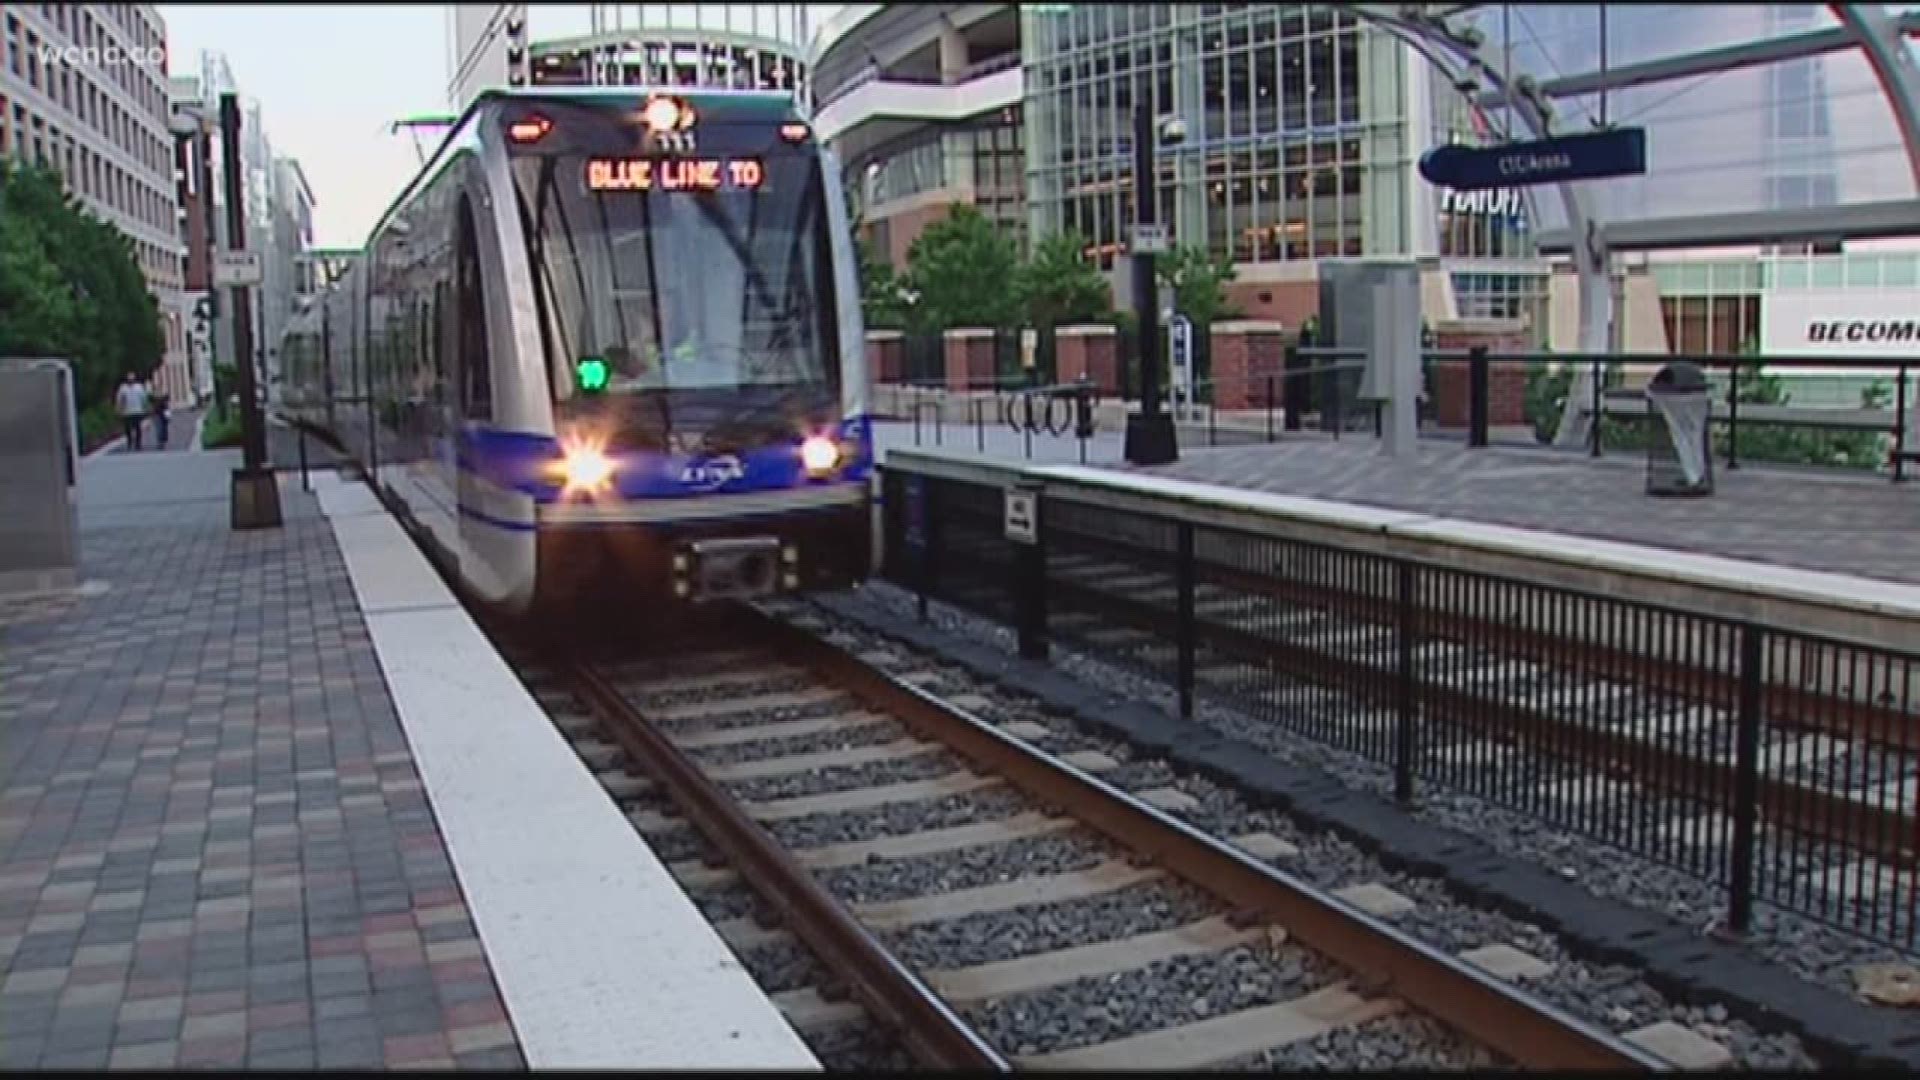 Charlotte city leaders and state transportation officials are expected to meet Wednesday to discuss the technical side of a plan to build a light rail from Matthews into Gaston County.